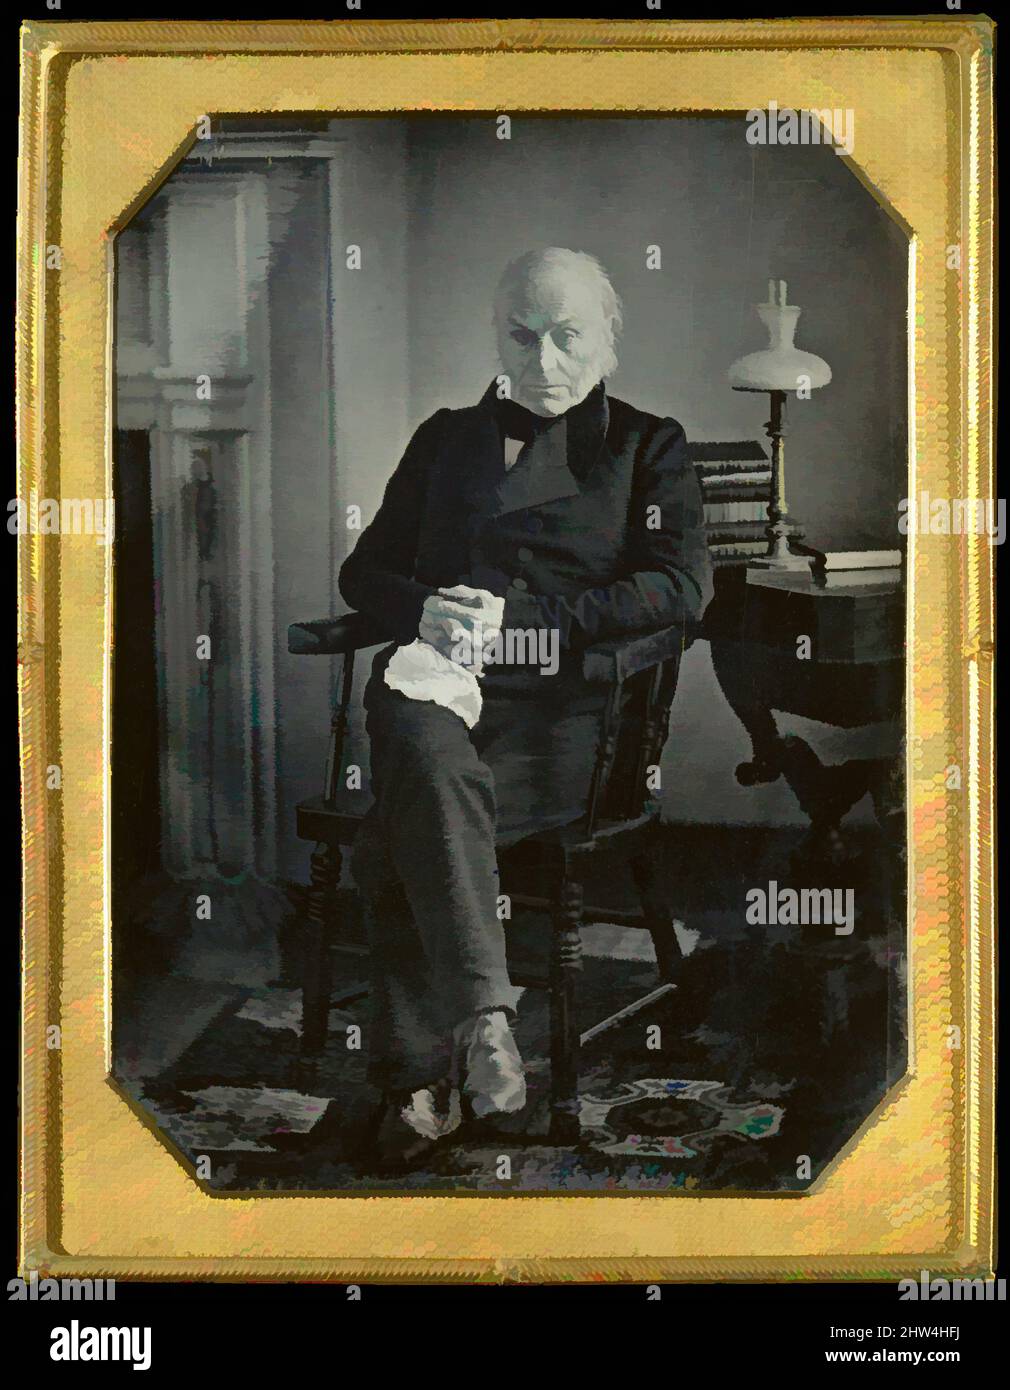 Art inspired by John Quincy Adams, ca. 1850, Daguerreotype, 12.0 x 9.0 cm (4 3/4 x 3 9/16 in.), Photographs, Albert Sands Southworth (American, West Fairlee, Vermont 1811–1894 Charlestown, Massachusetts), Josiah Johnson Hawes (American, Wayland, Massachusetts 1808–1901 Crawford Notch, Classic works modernized by Artotop with a splash of modernity. Shapes, color and value, eye-catching visual impact on art. Emotions through freedom of artworks in a contemporary way. A timeless message pursuing a wildly creative new direction. Artists turning to the digital medium and creating the Artotop NFT Stock Photo